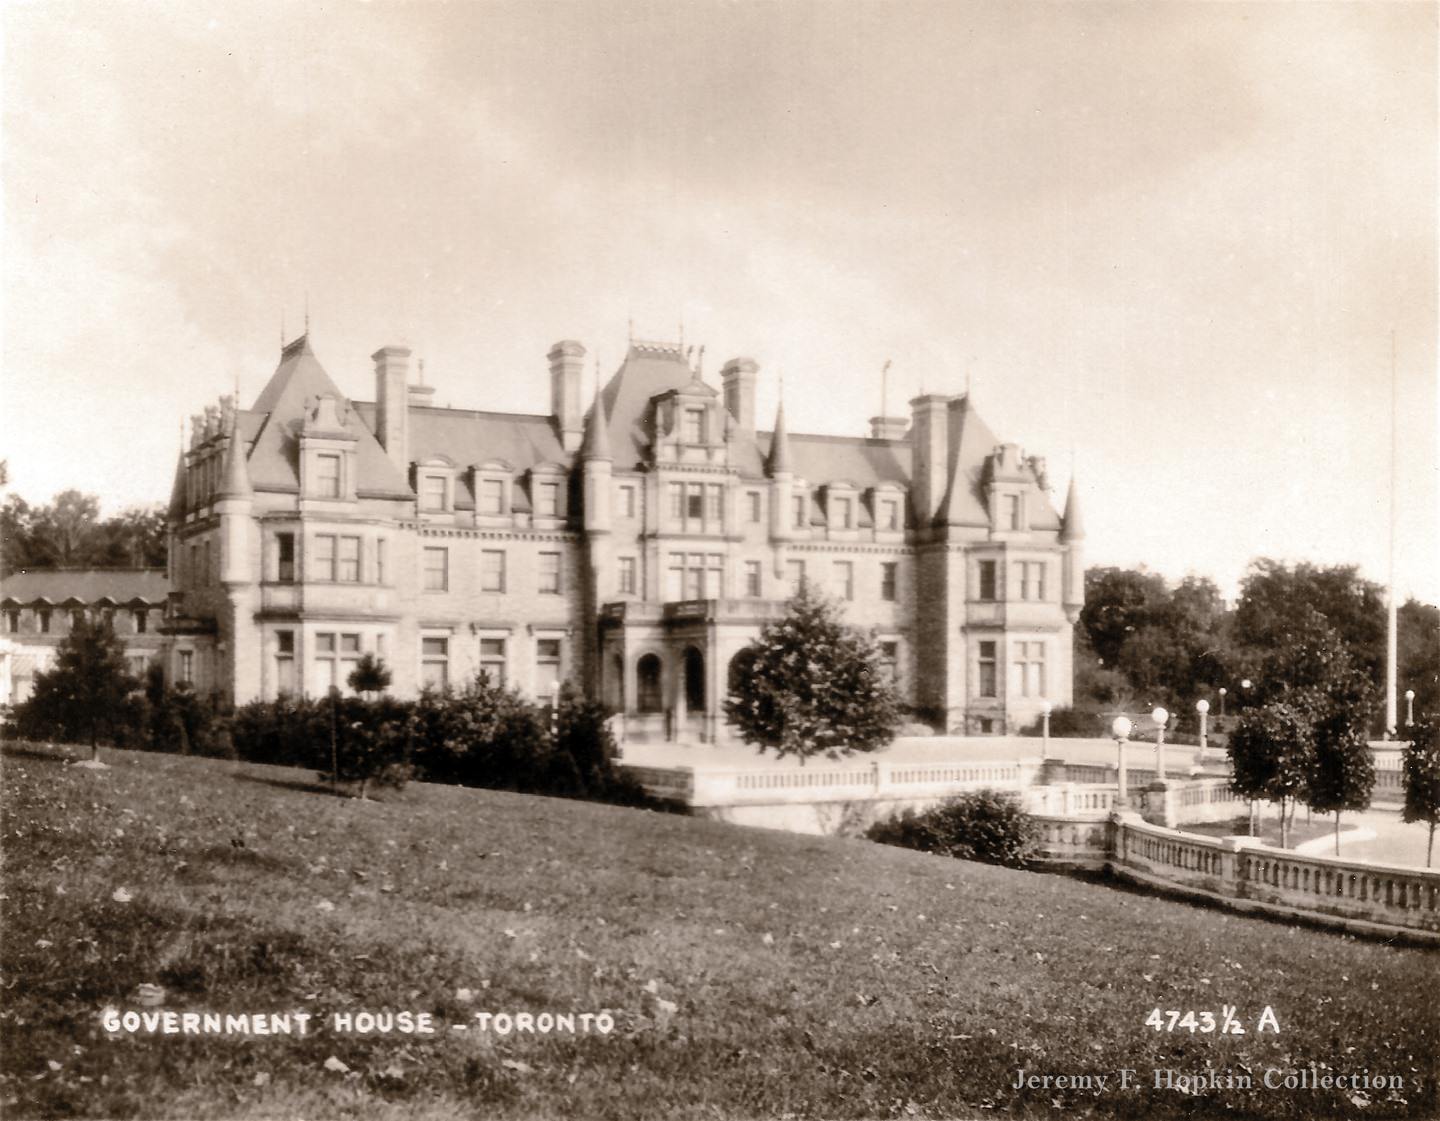 Government House, also known as Chorley Park, 1920. Demolished in the 1960s, a City of Toronto park bearing its name now marks the site where it once stood in Rosedale.